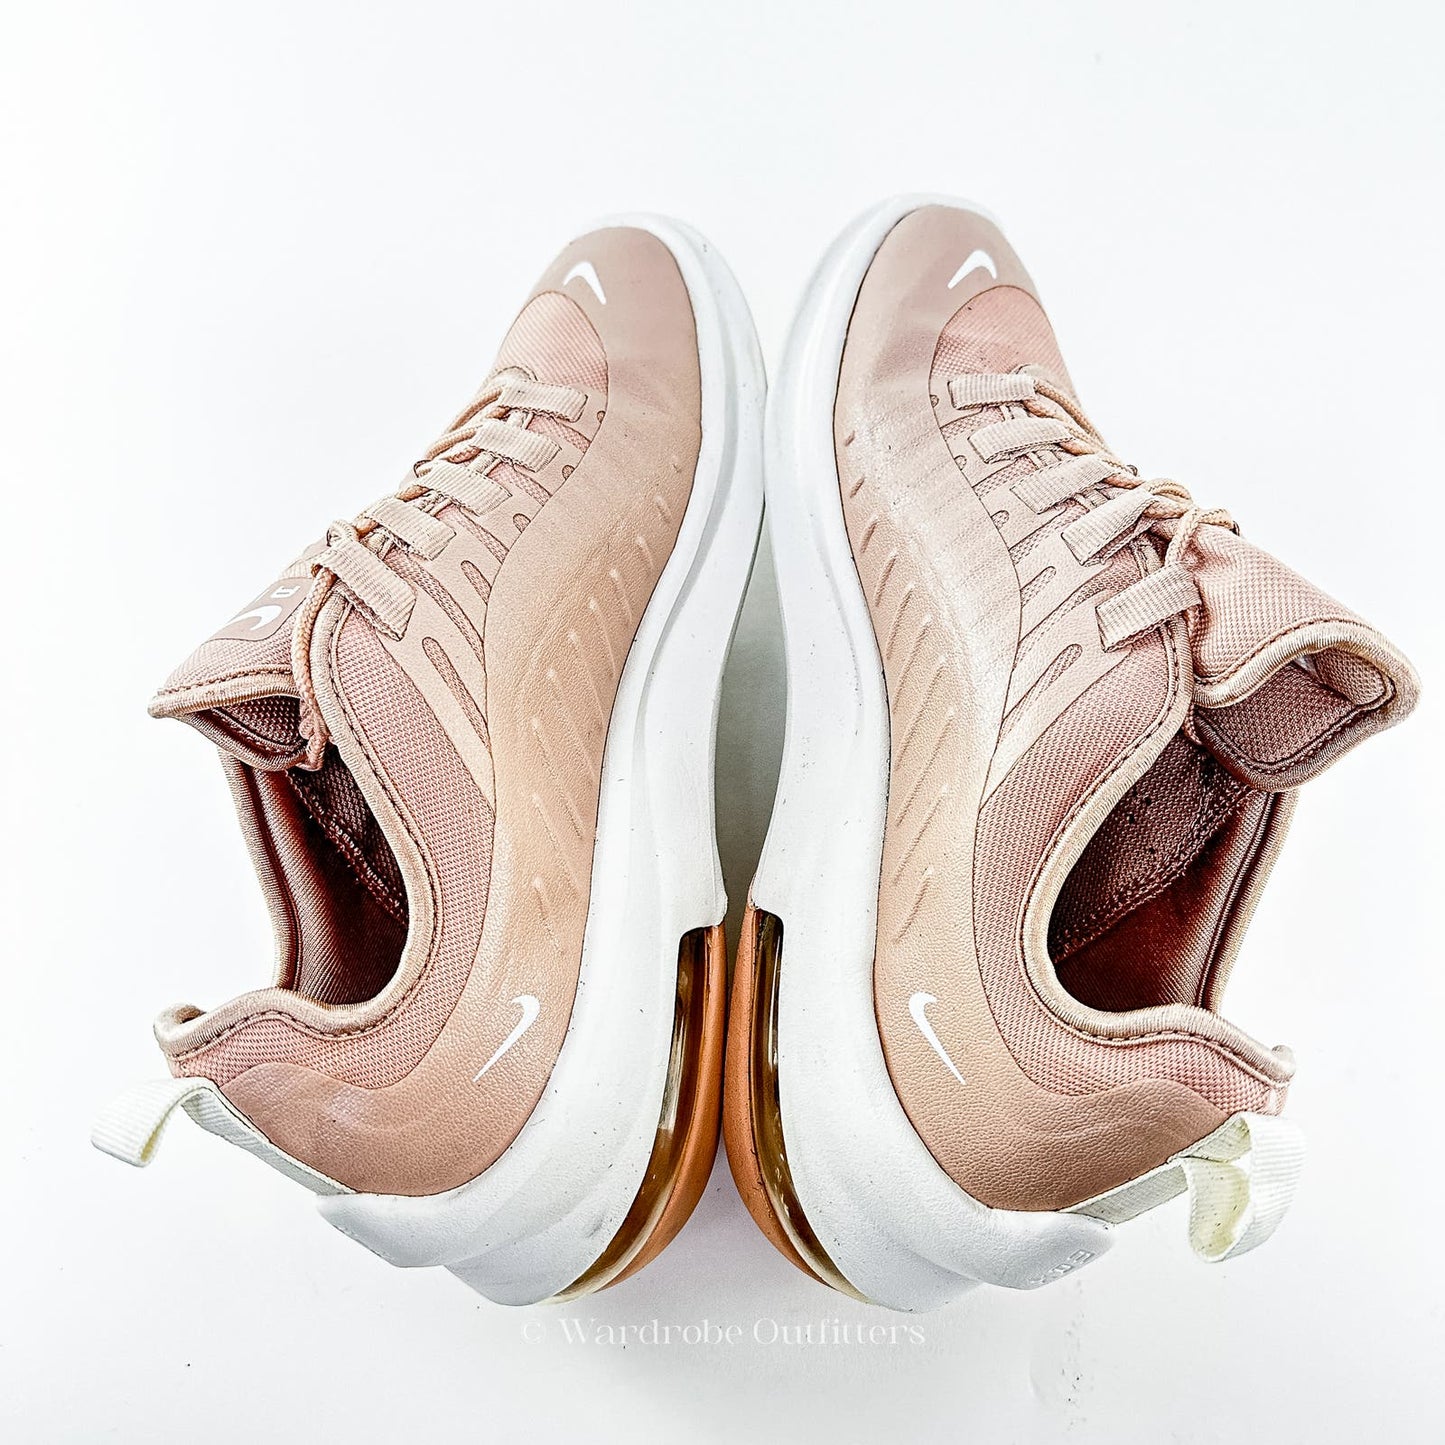 Nike Air Max Axis 'Particle Beige' Sneakers - 8